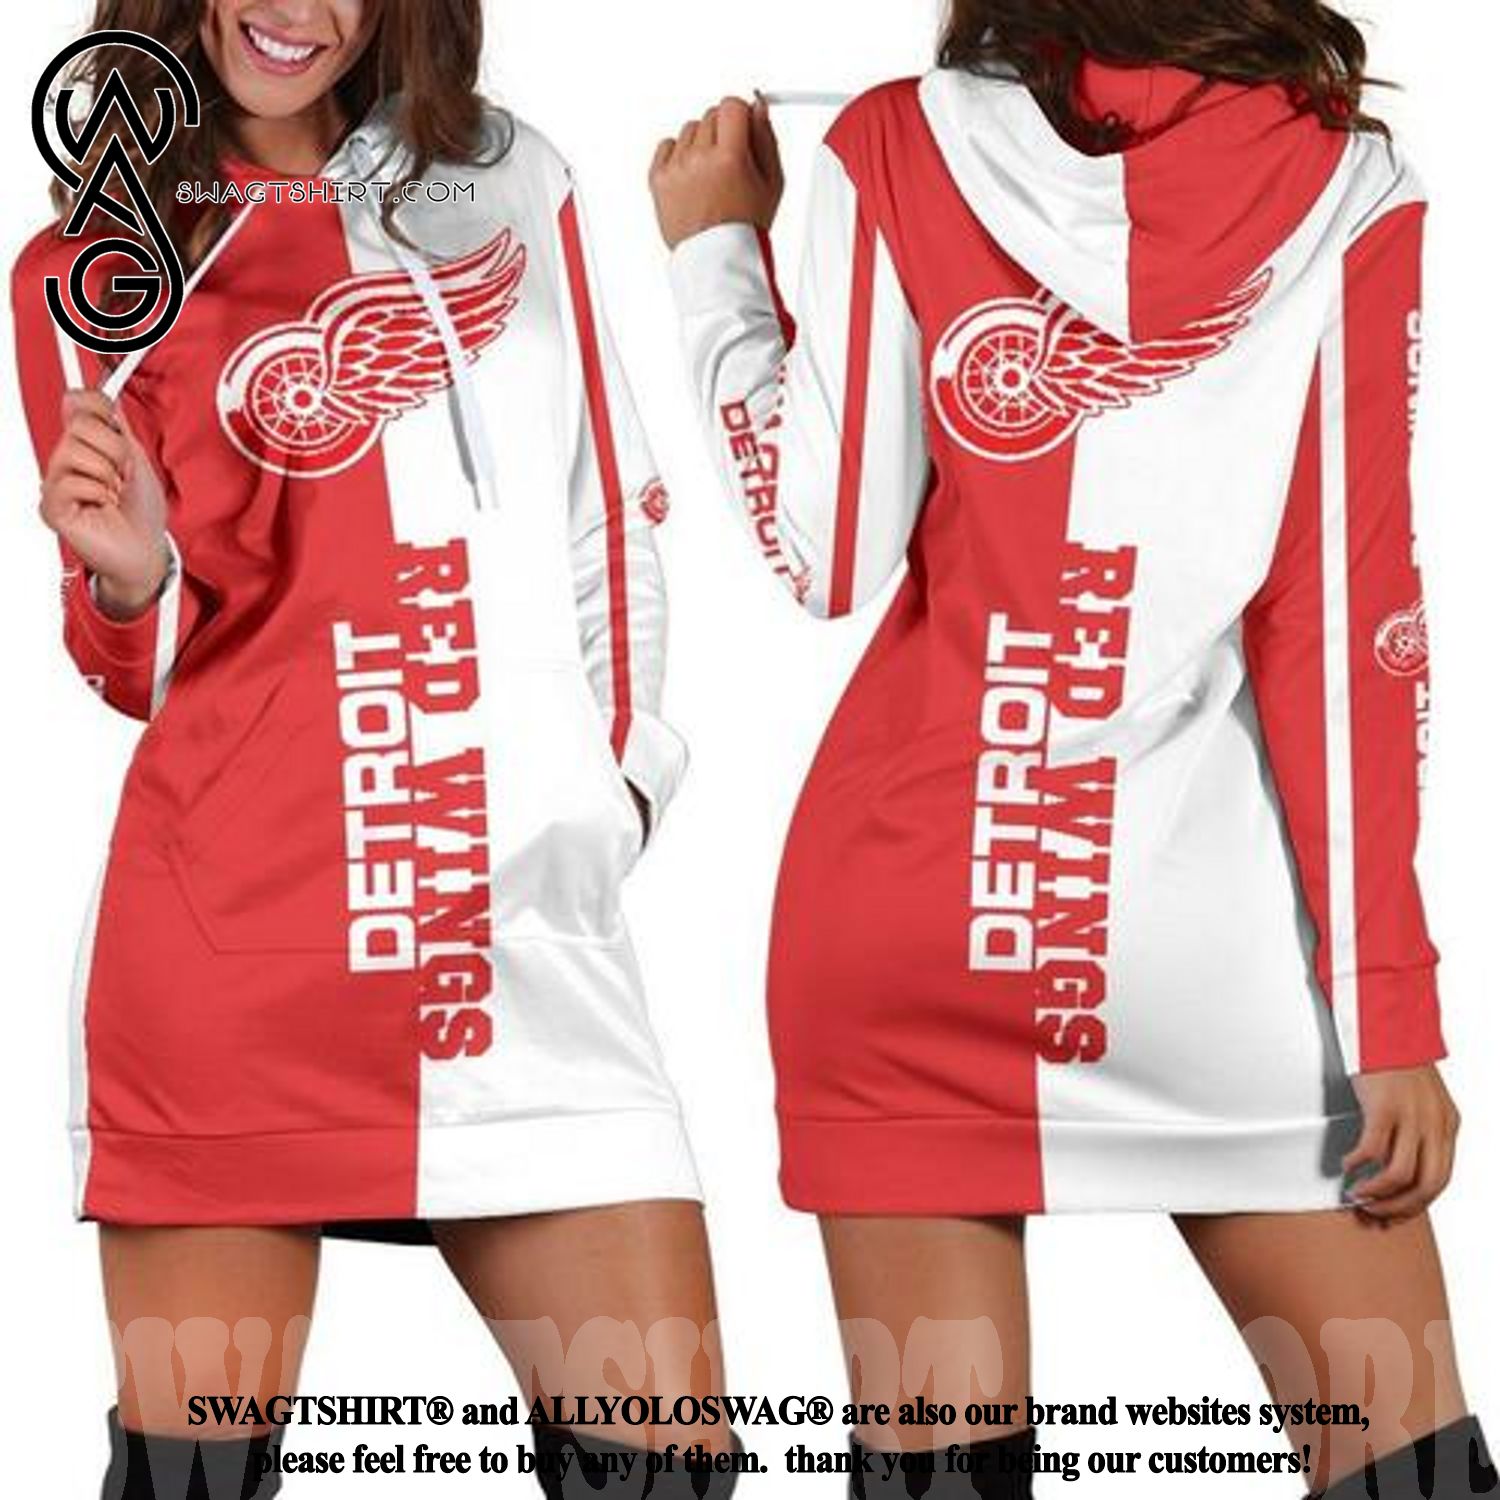 outfit red wing jersey